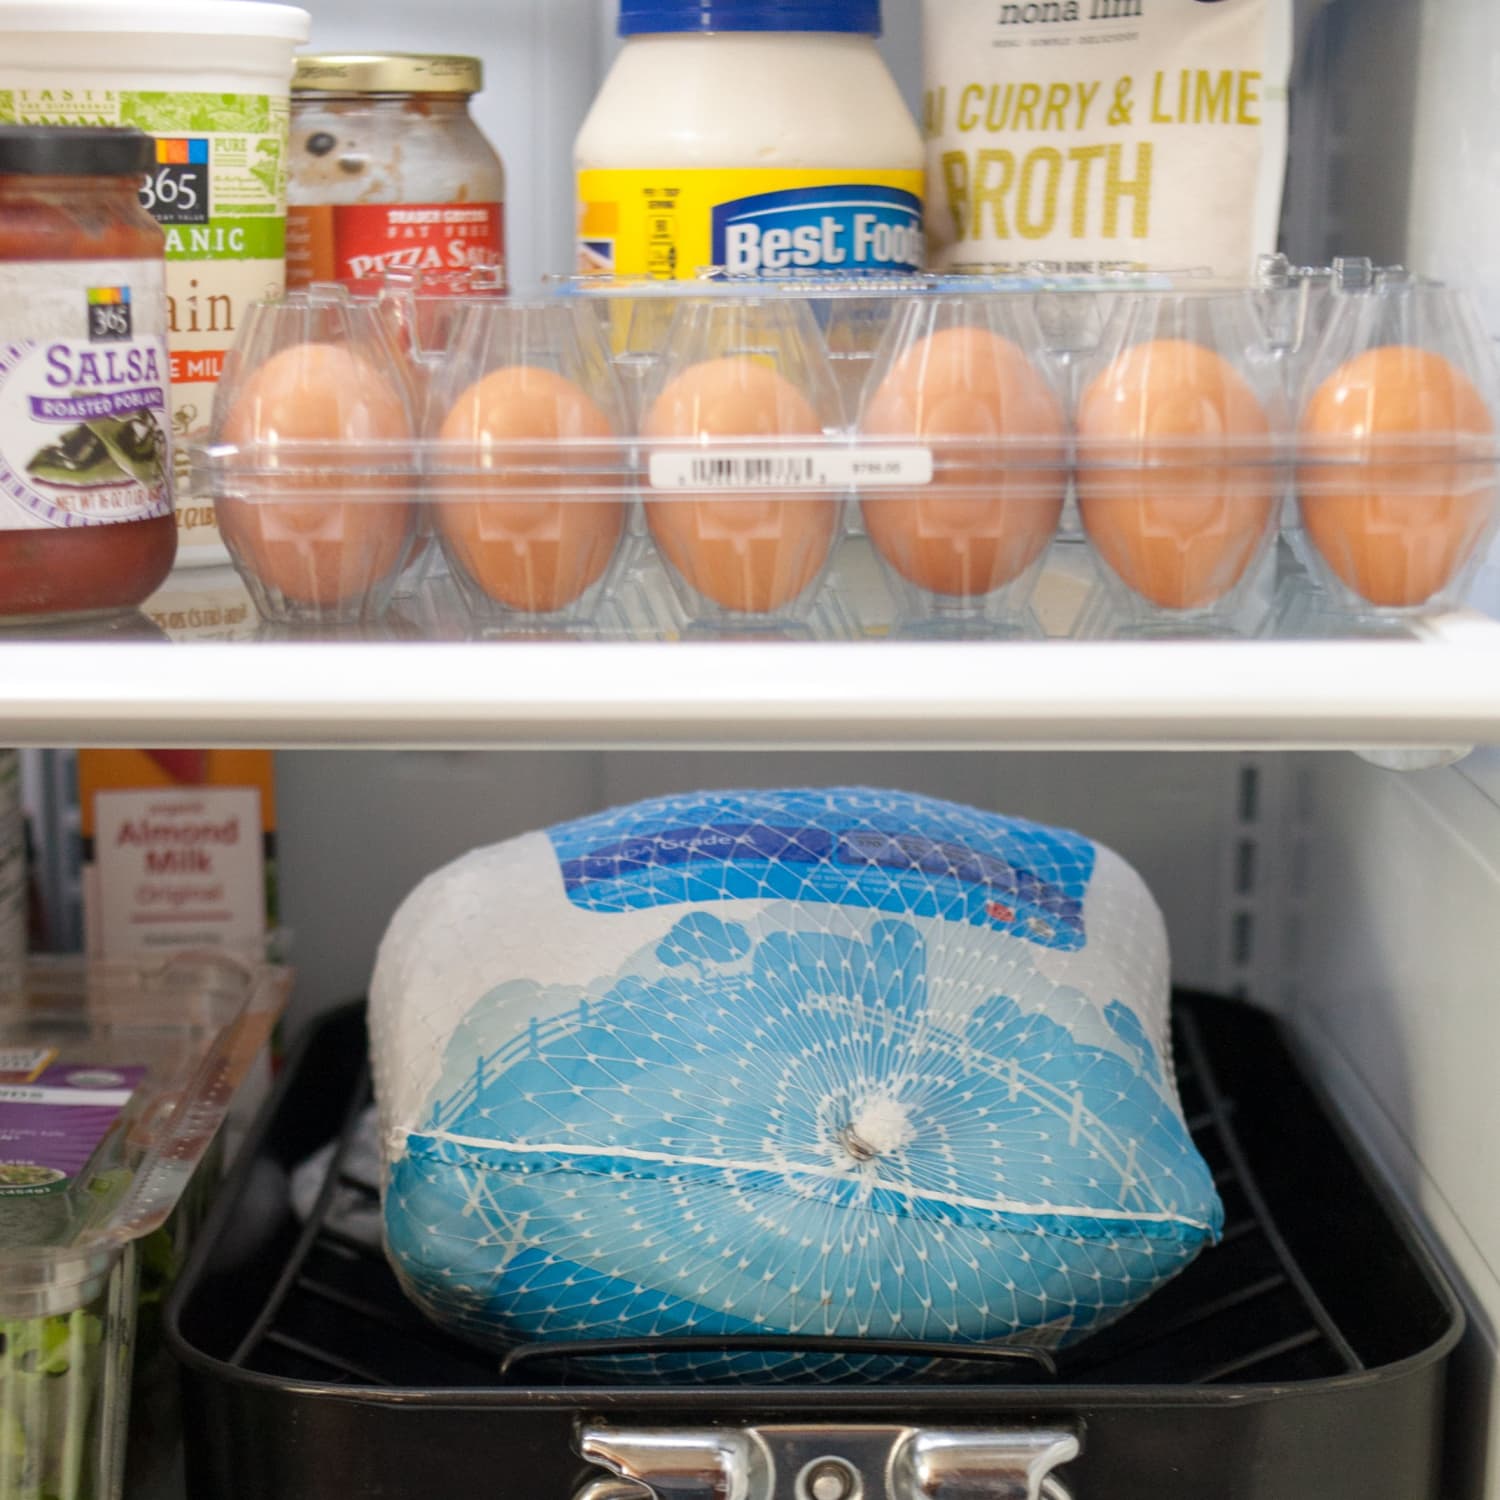 How To Thaw A Turkey How Long To Defrost A Turkey Kitchn,Japanese Squash Air Freshener